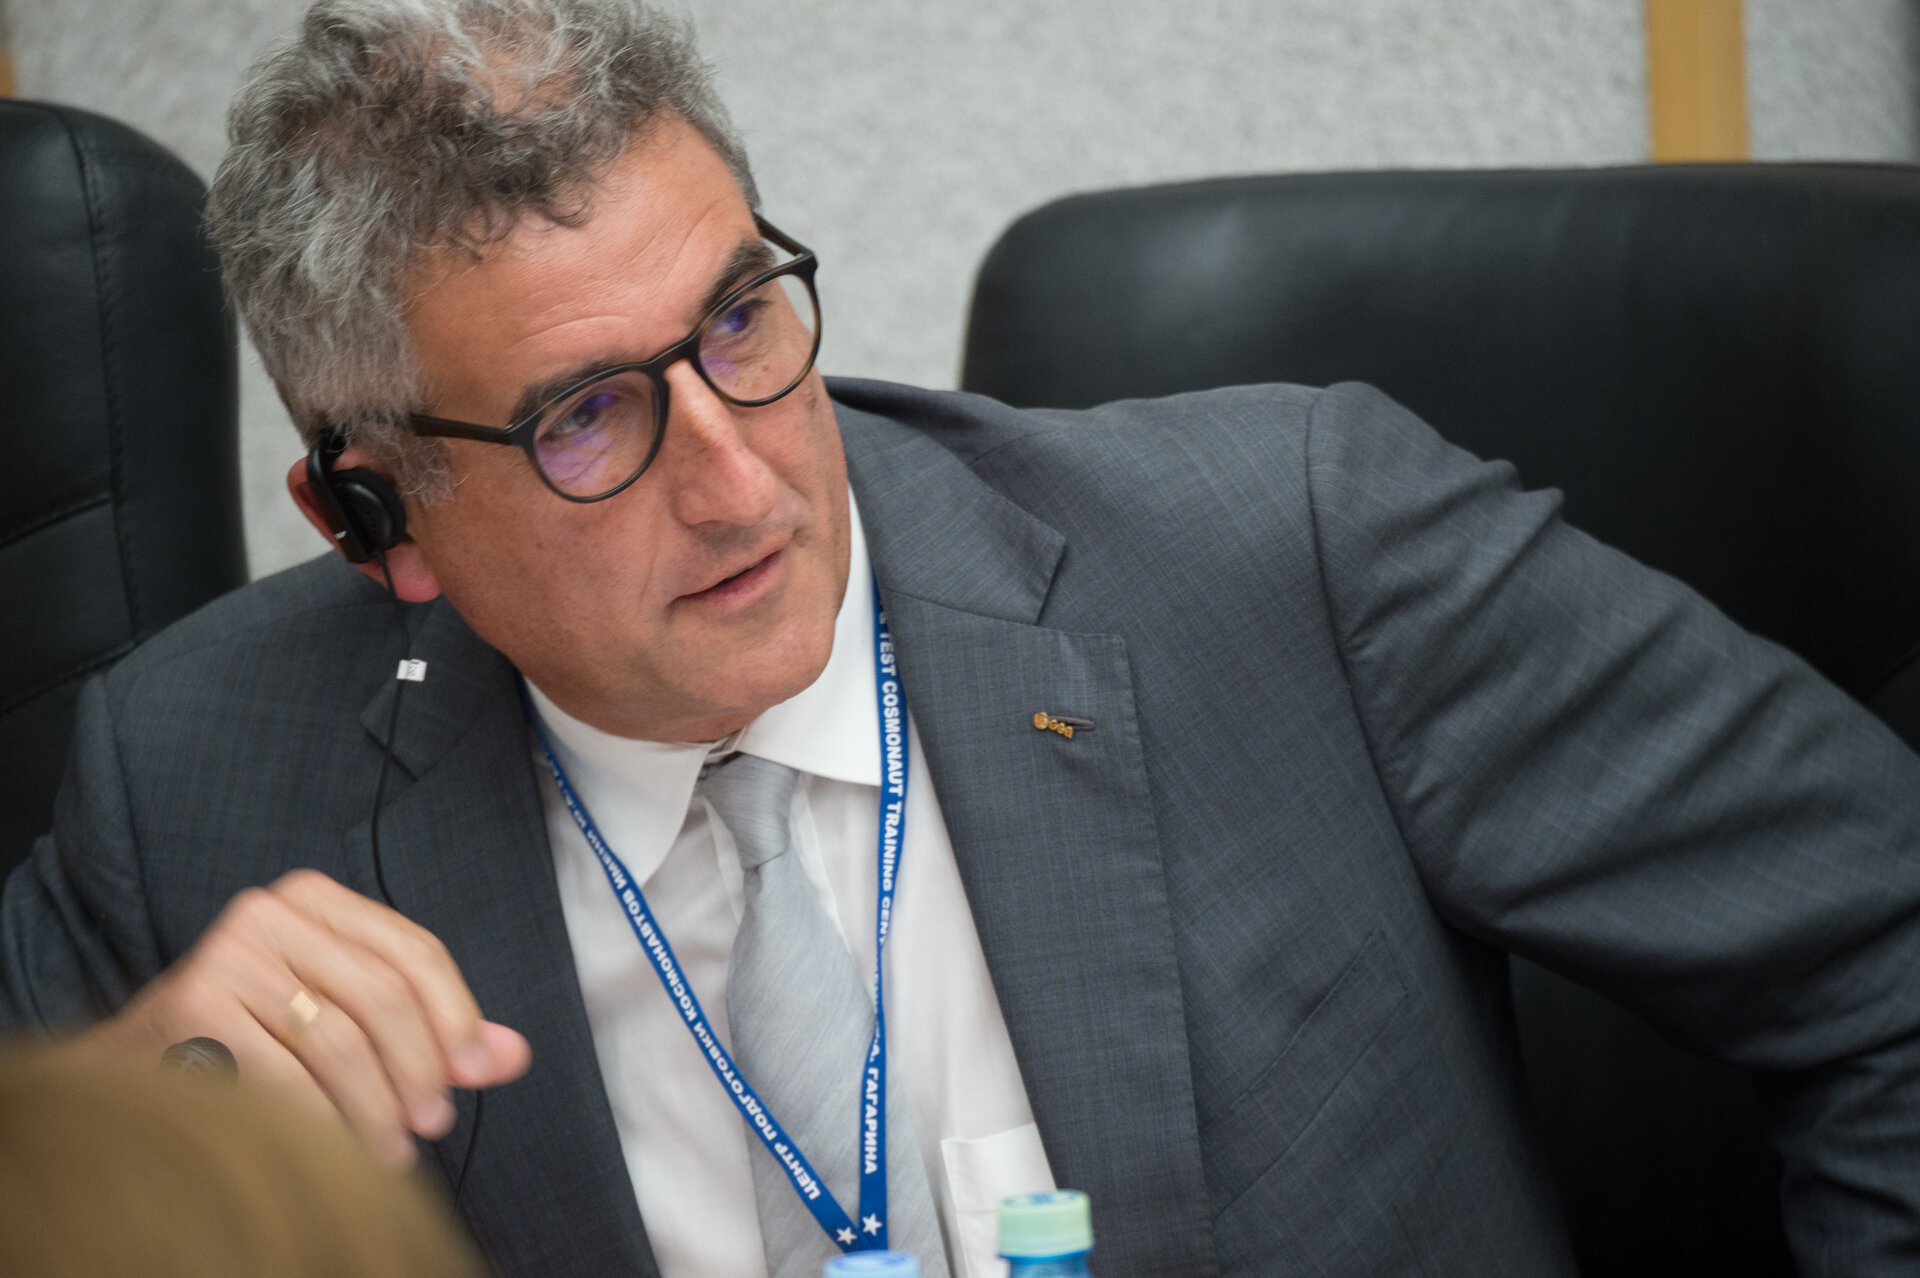  Franco Ongaro during the State Commission meeting